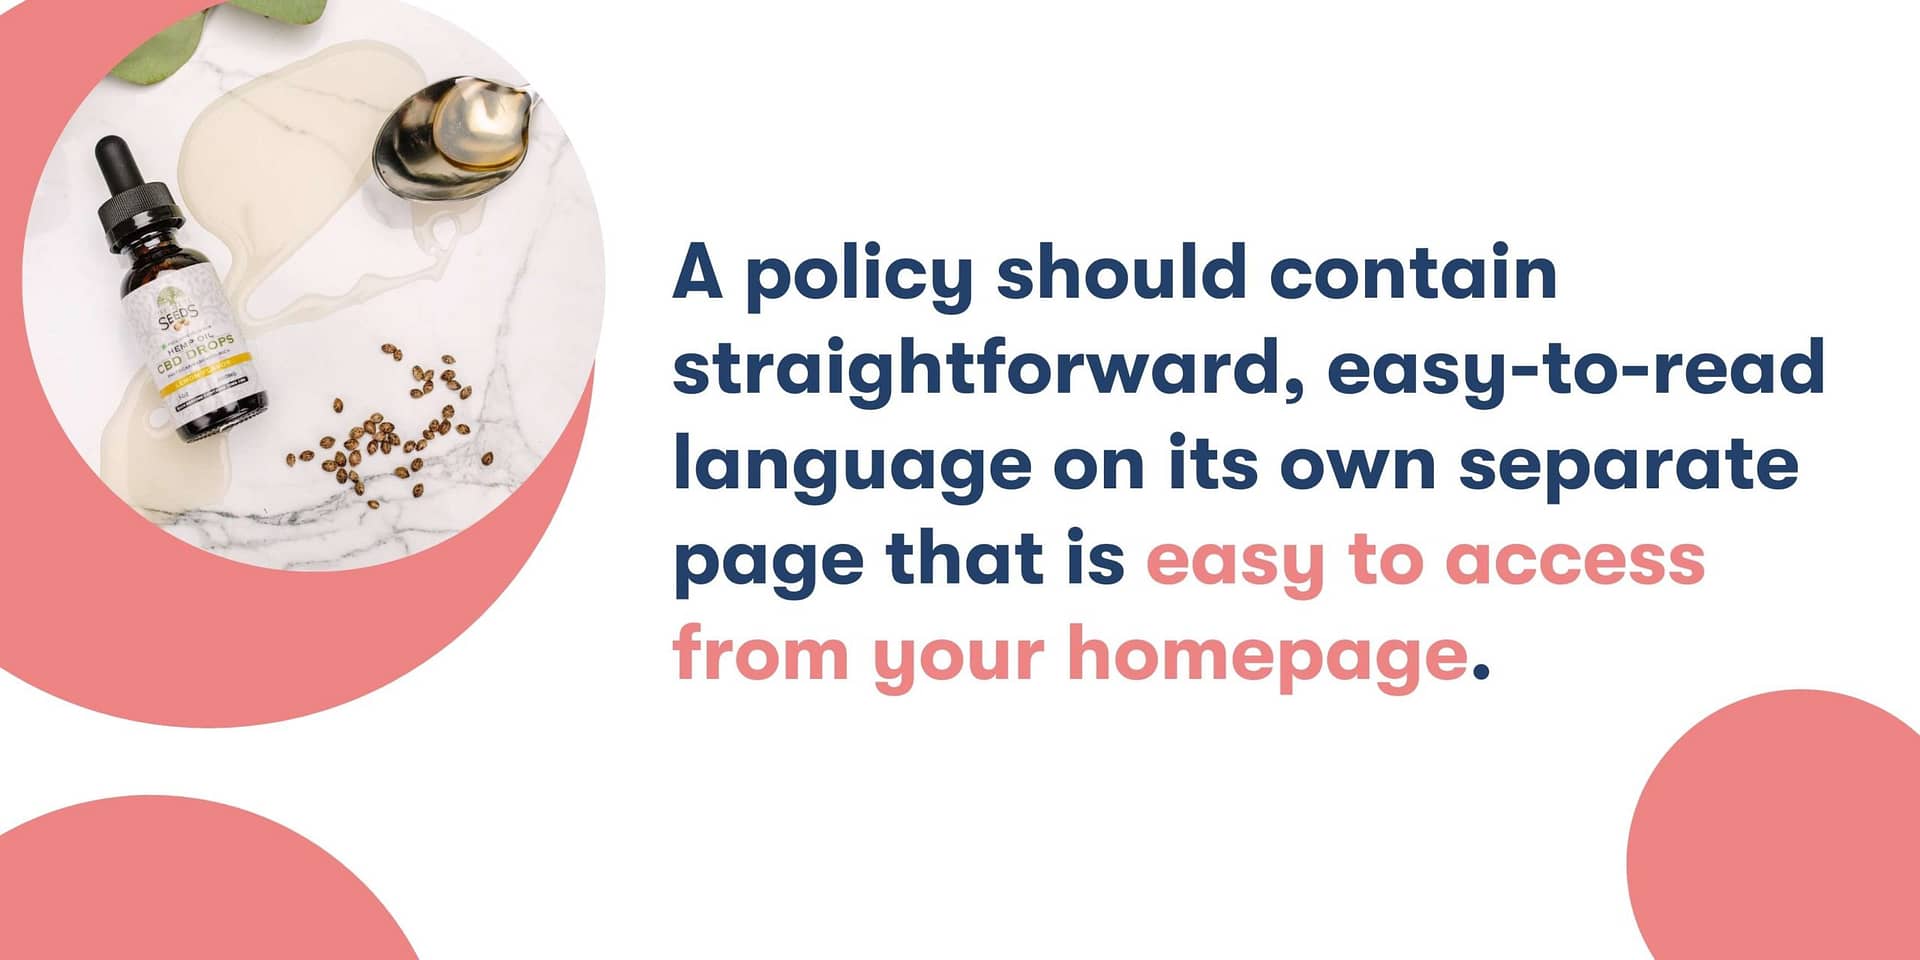 A policy should be easy-to-understand on a page that is easy to access from homepage